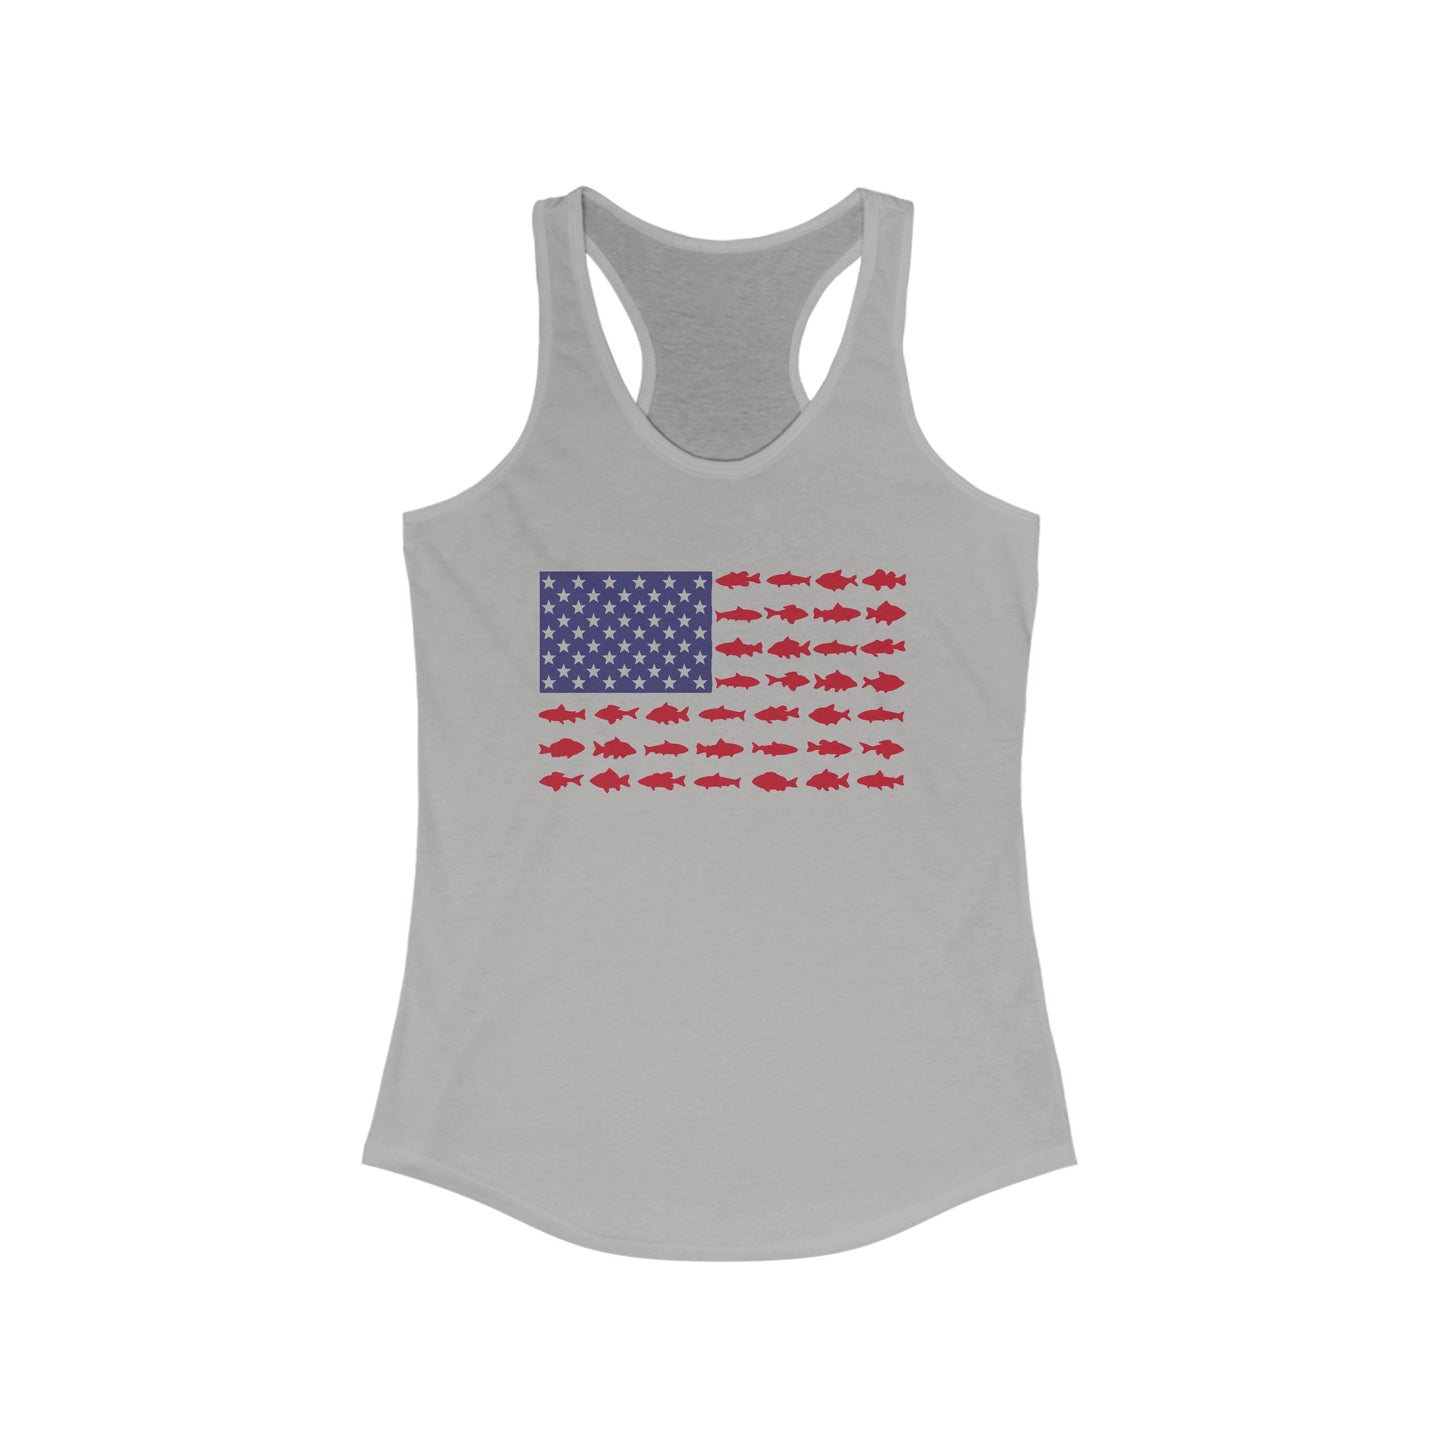 American Flag with Fish Stipes Women's Ideal Racerback Tank